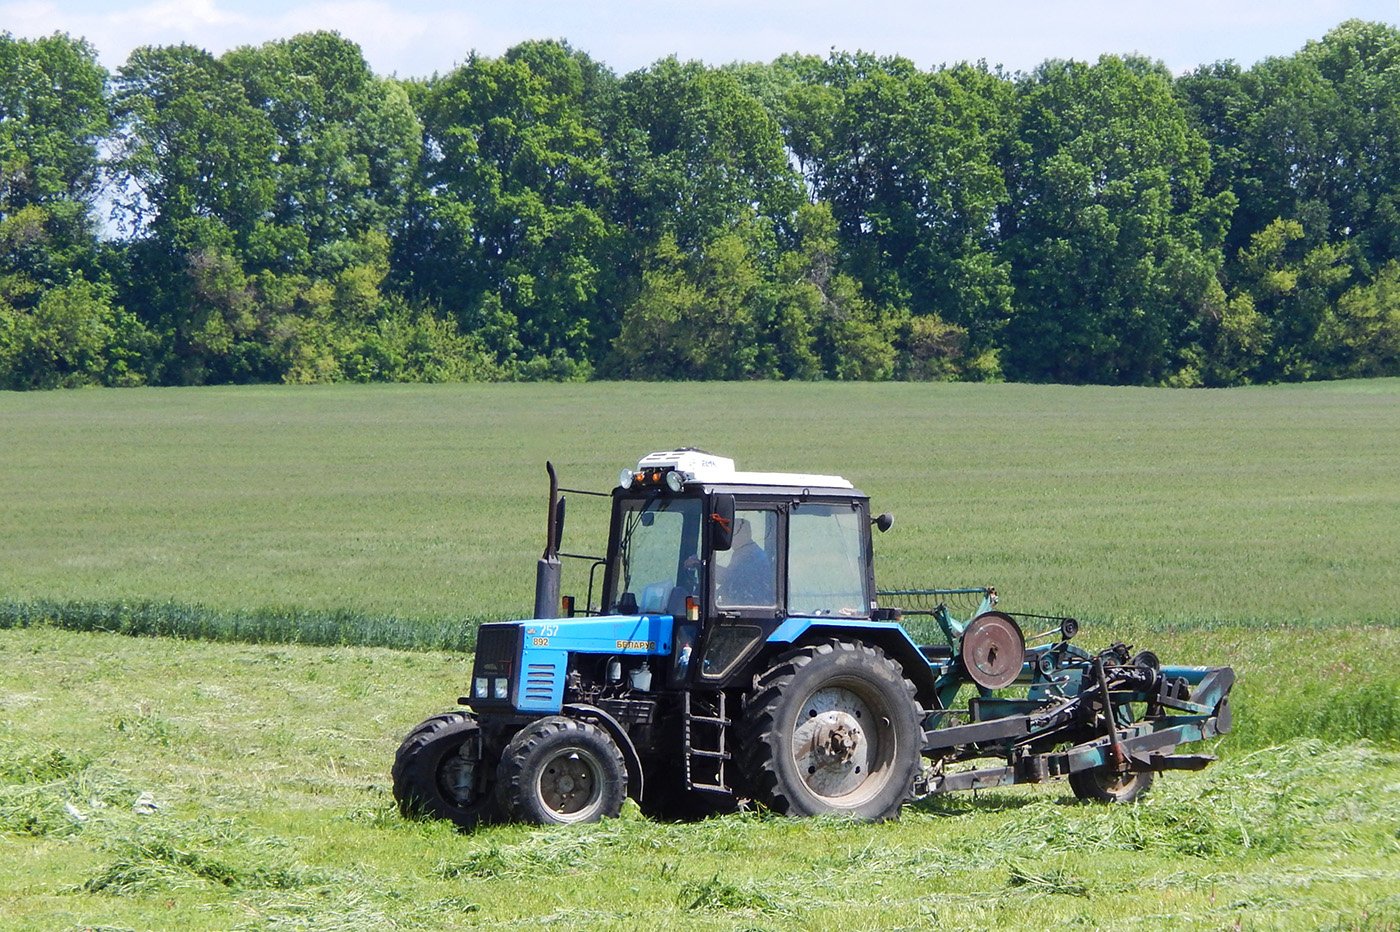 Tractor 2. Трактор МТЗ Беларус 892. МТЗ 892.2. Трактор Belarus-892.2. Трактор Беларус МТЗ 82.